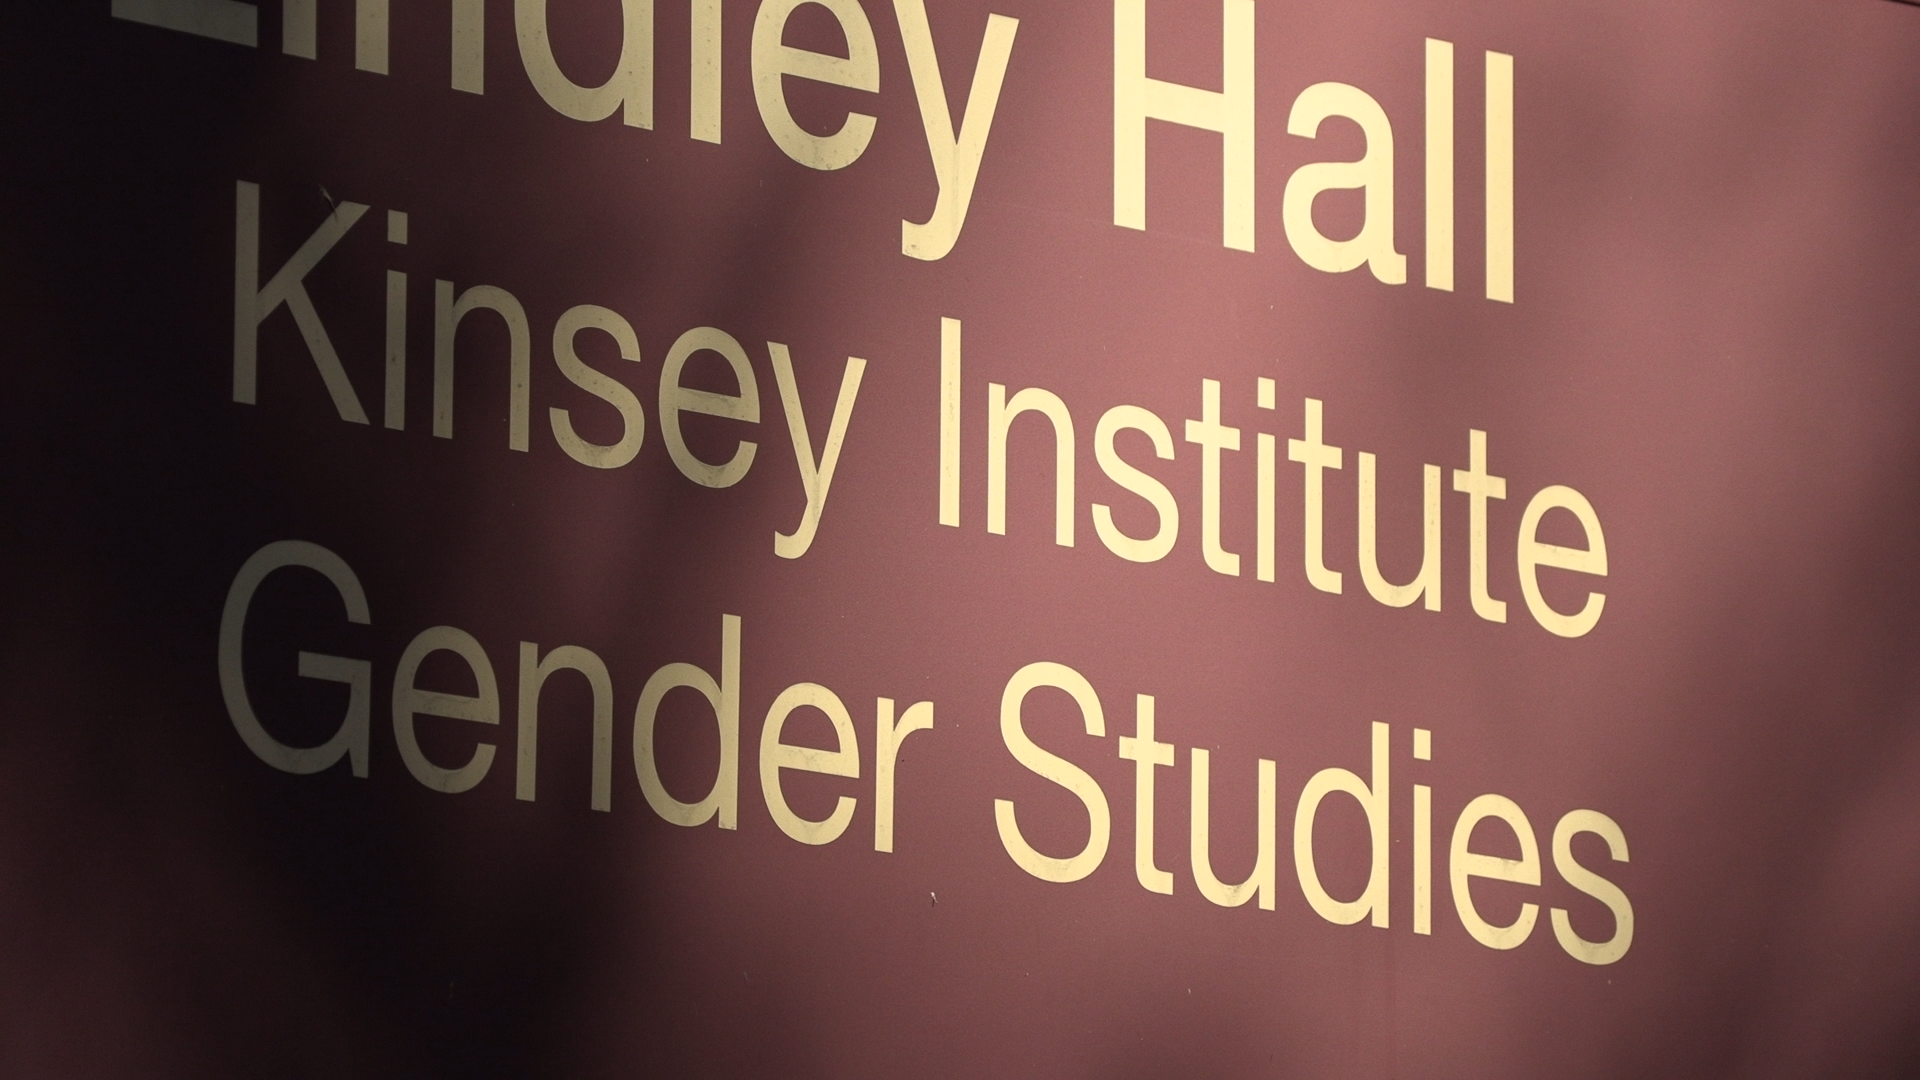 IU Board of Trustees votes to protect Kinsey Institute